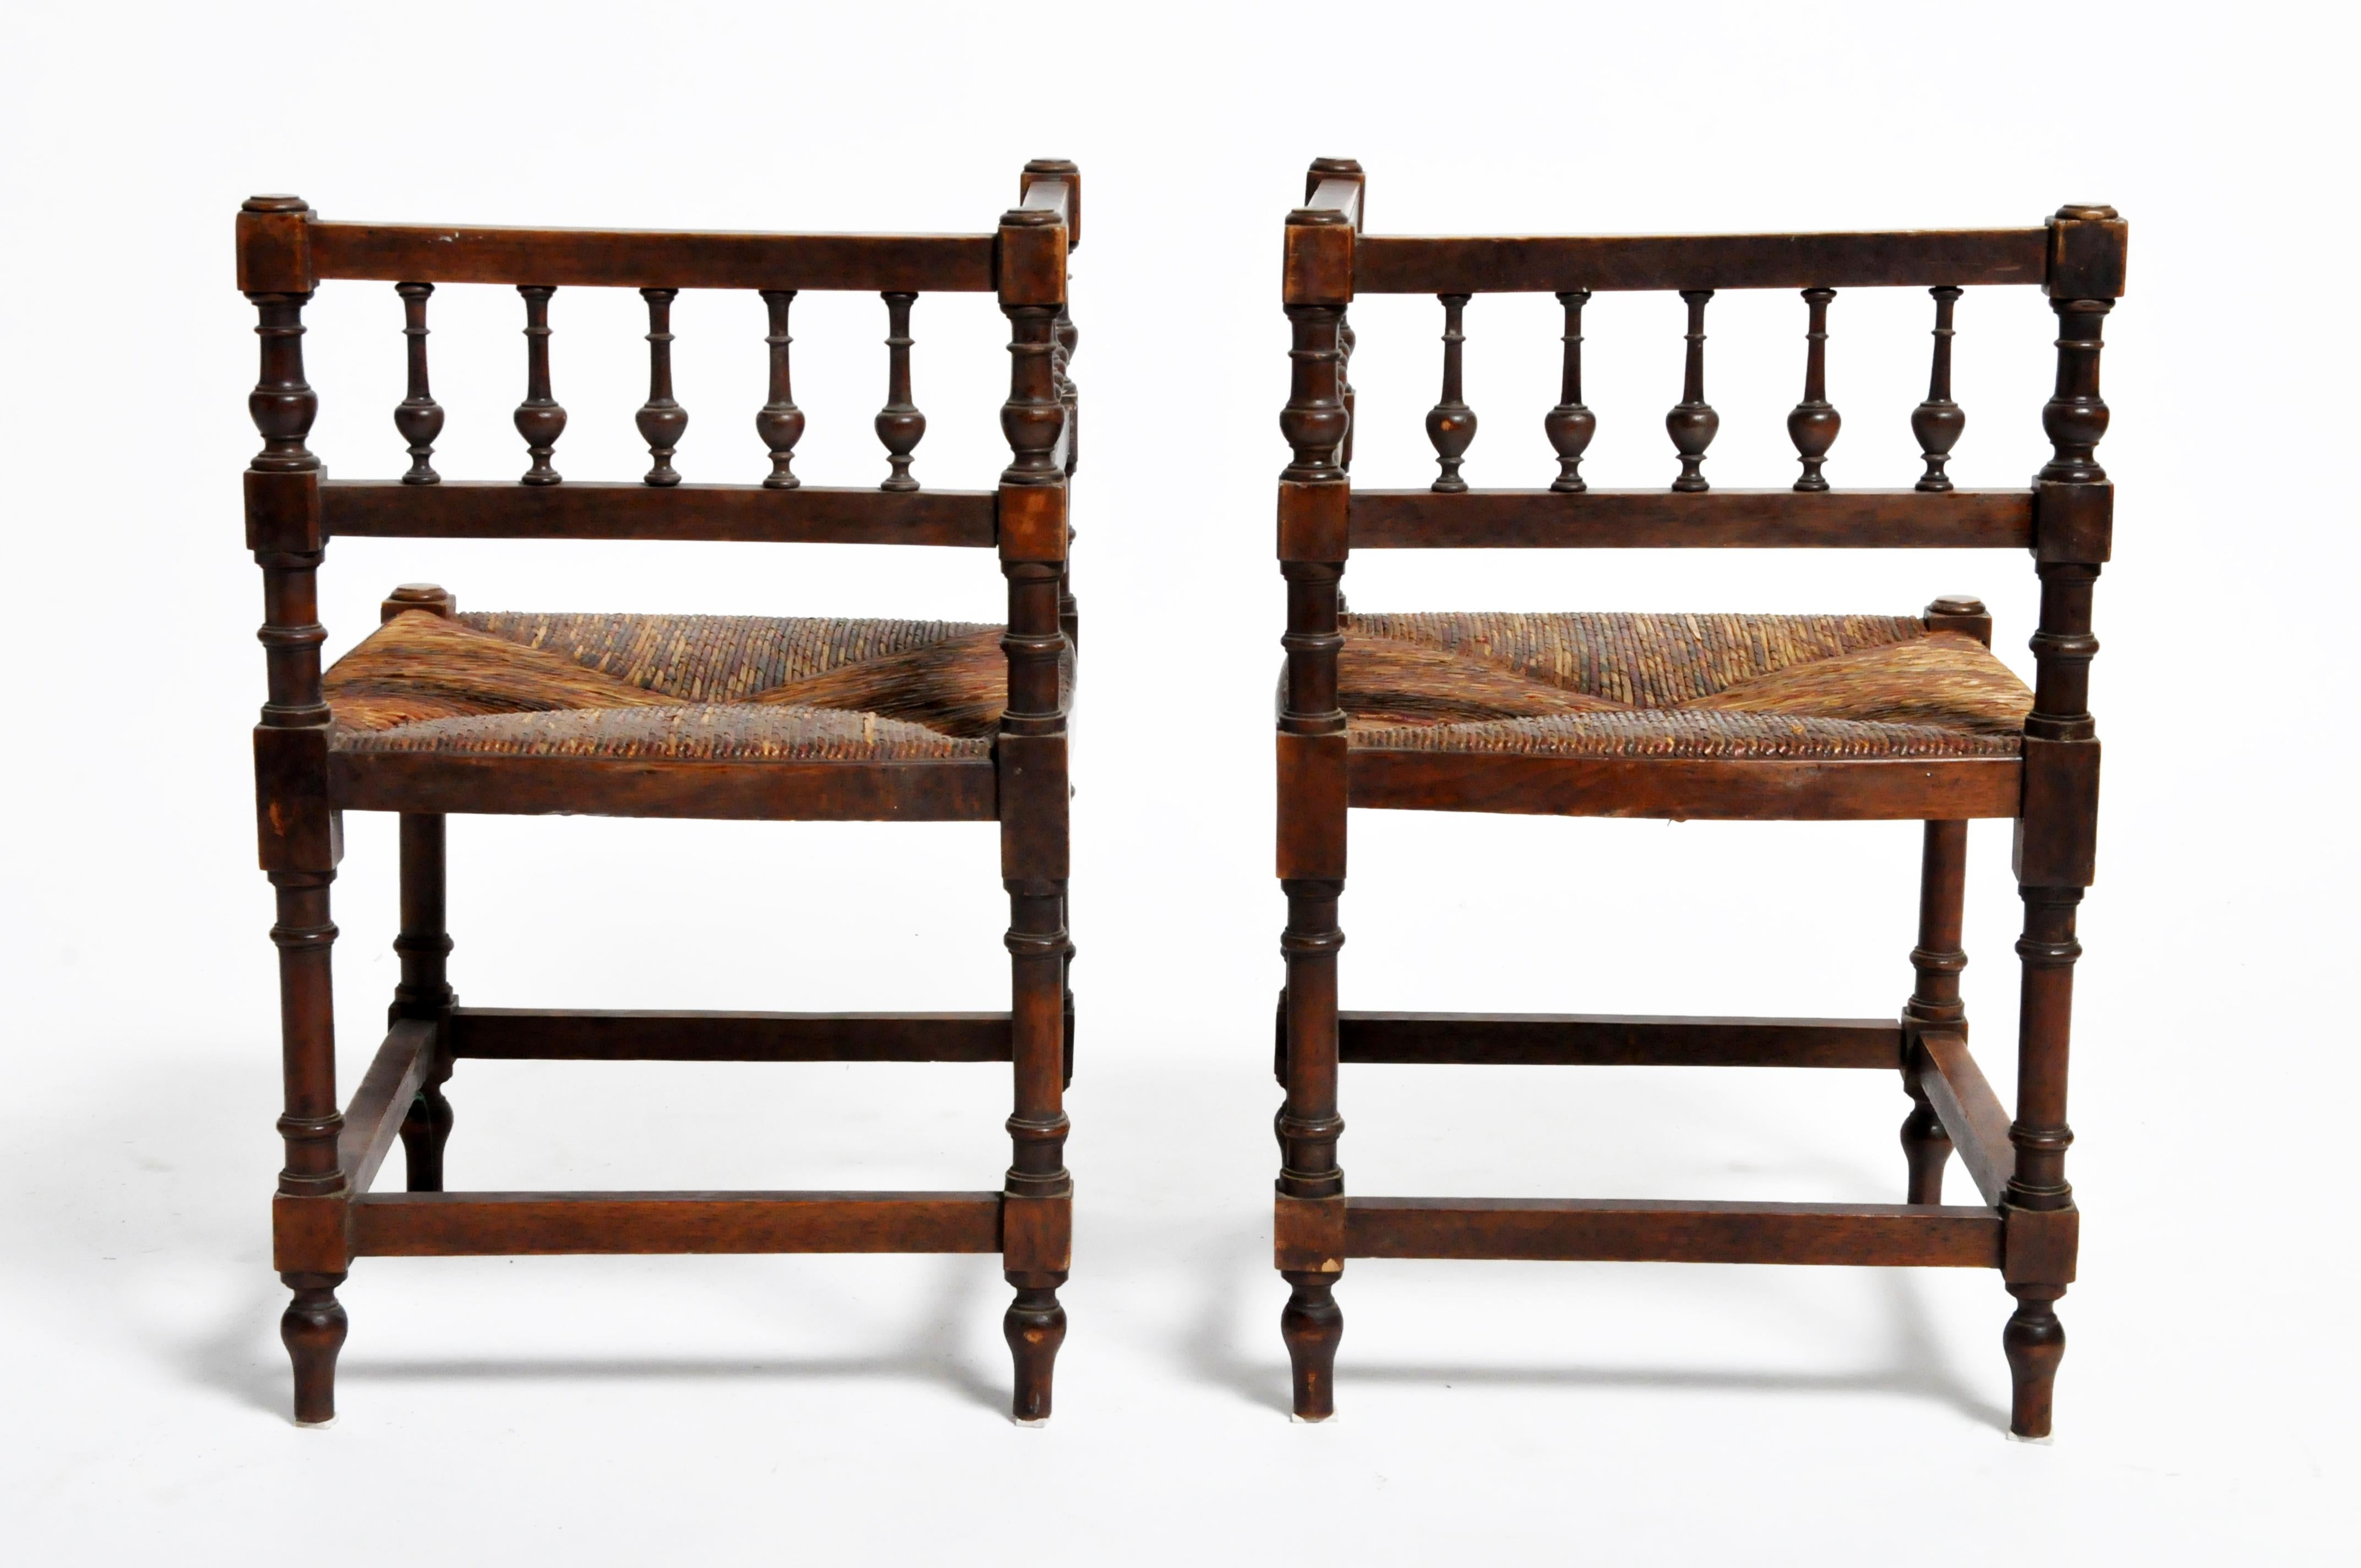 This pair of wooden corner chairs is from France and was made circa 1900. Strong and sturdy, the chairs feature comfortable rush seats and are suitable for everyday use.